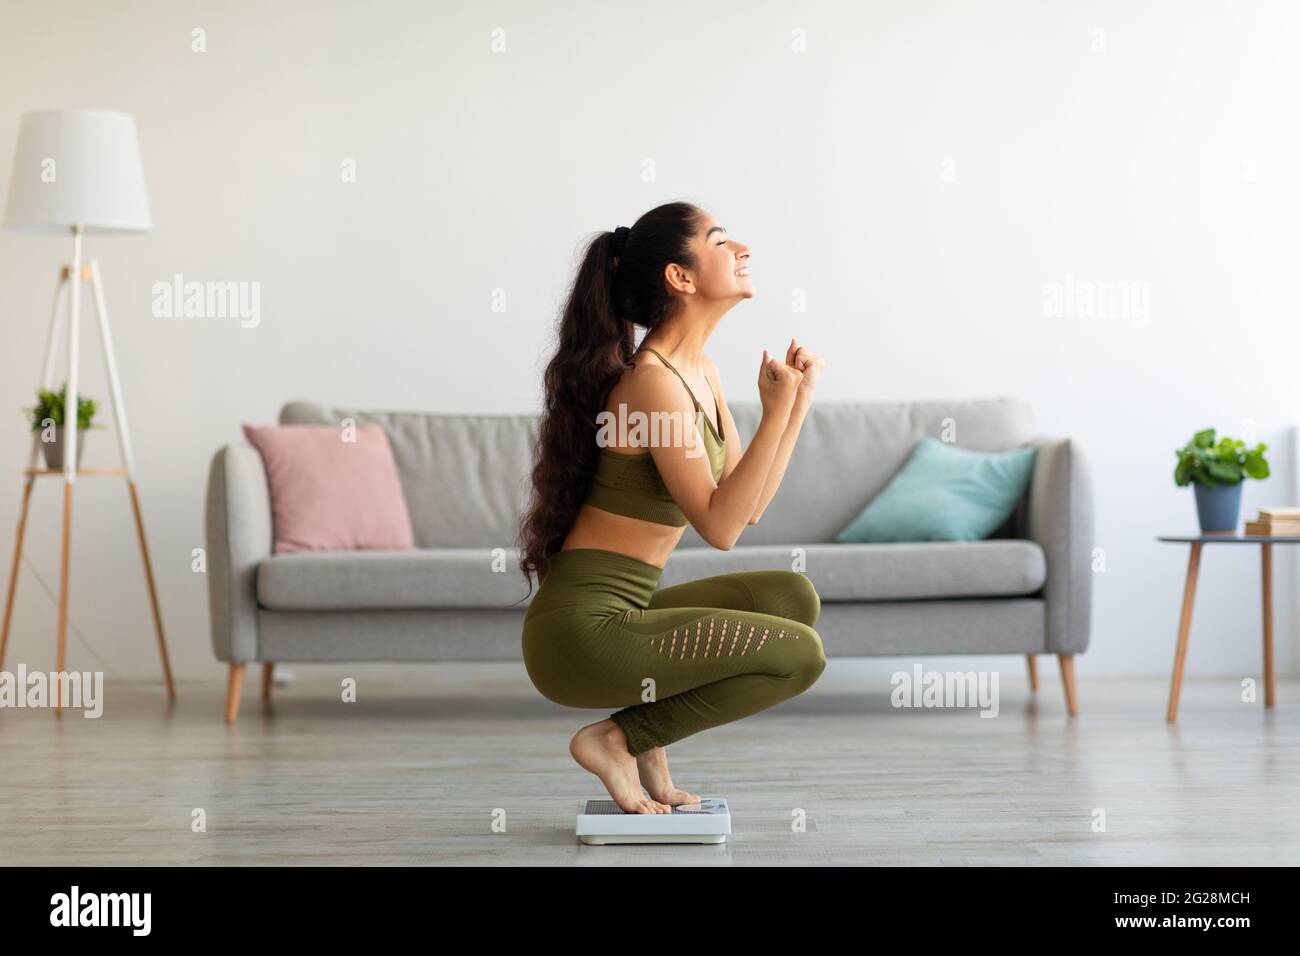 Full length of excited Indian woman sitting on scales at home, overjoyed with success of her slimming diet, side view Stock Photo